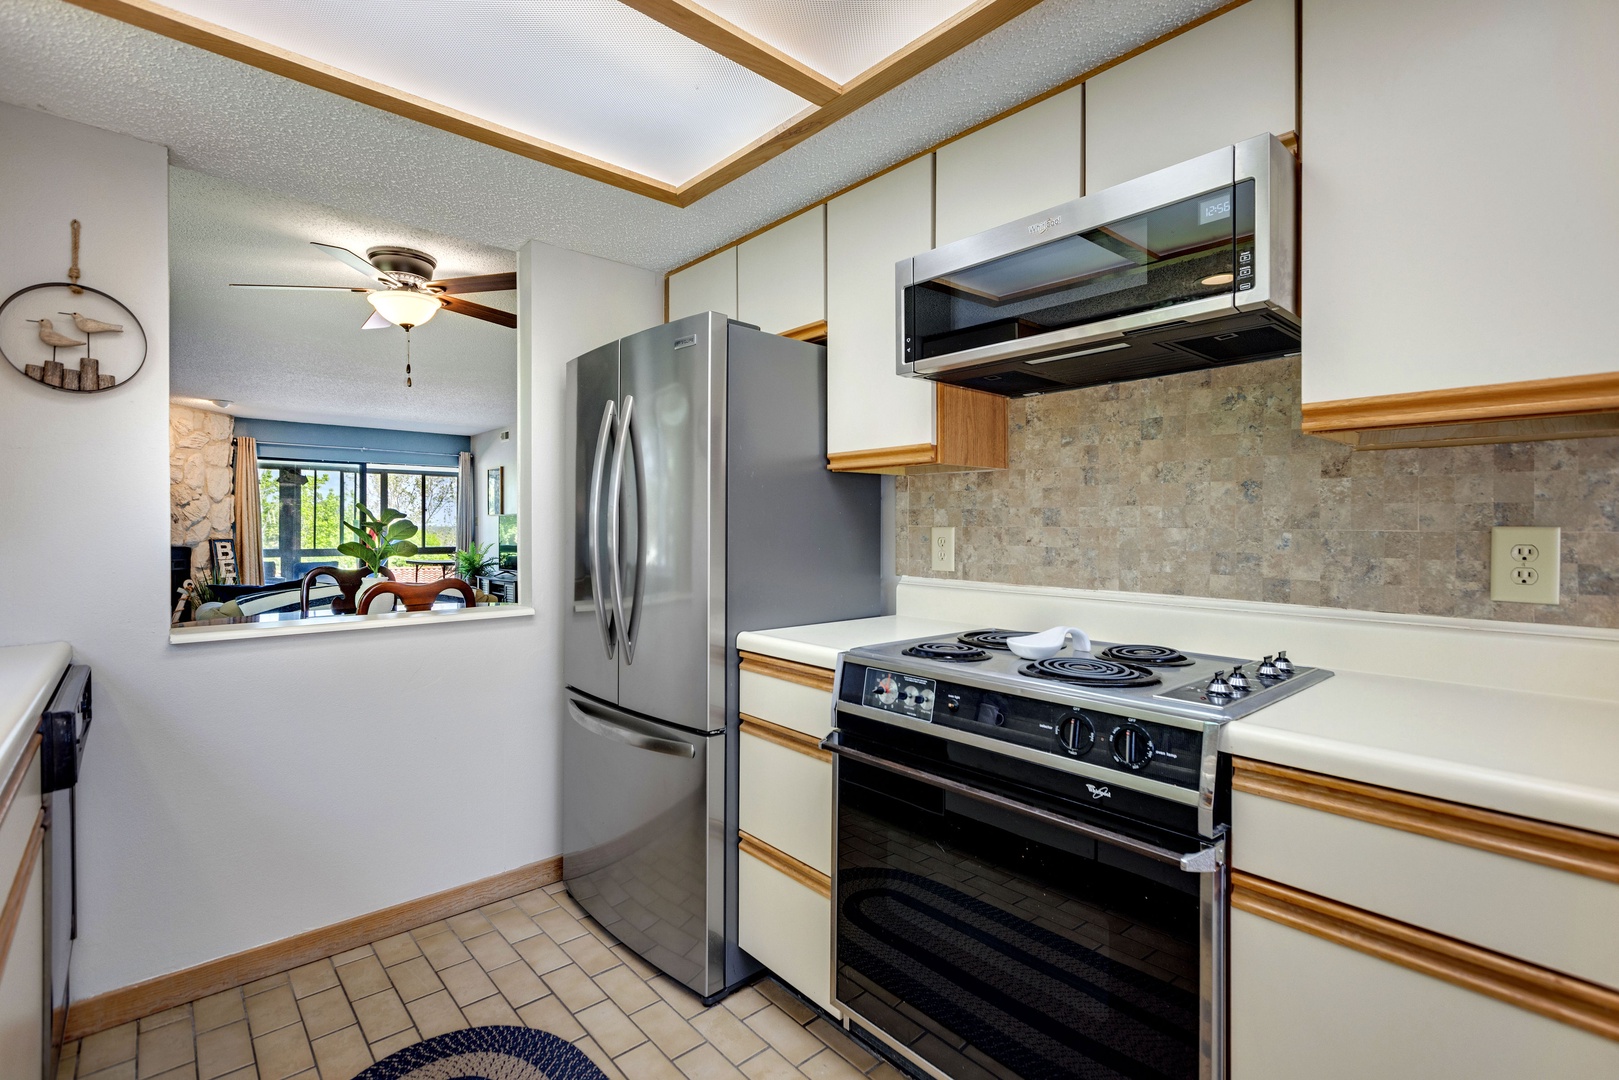 The quaint kitchen offers ample space and all the comforts of home